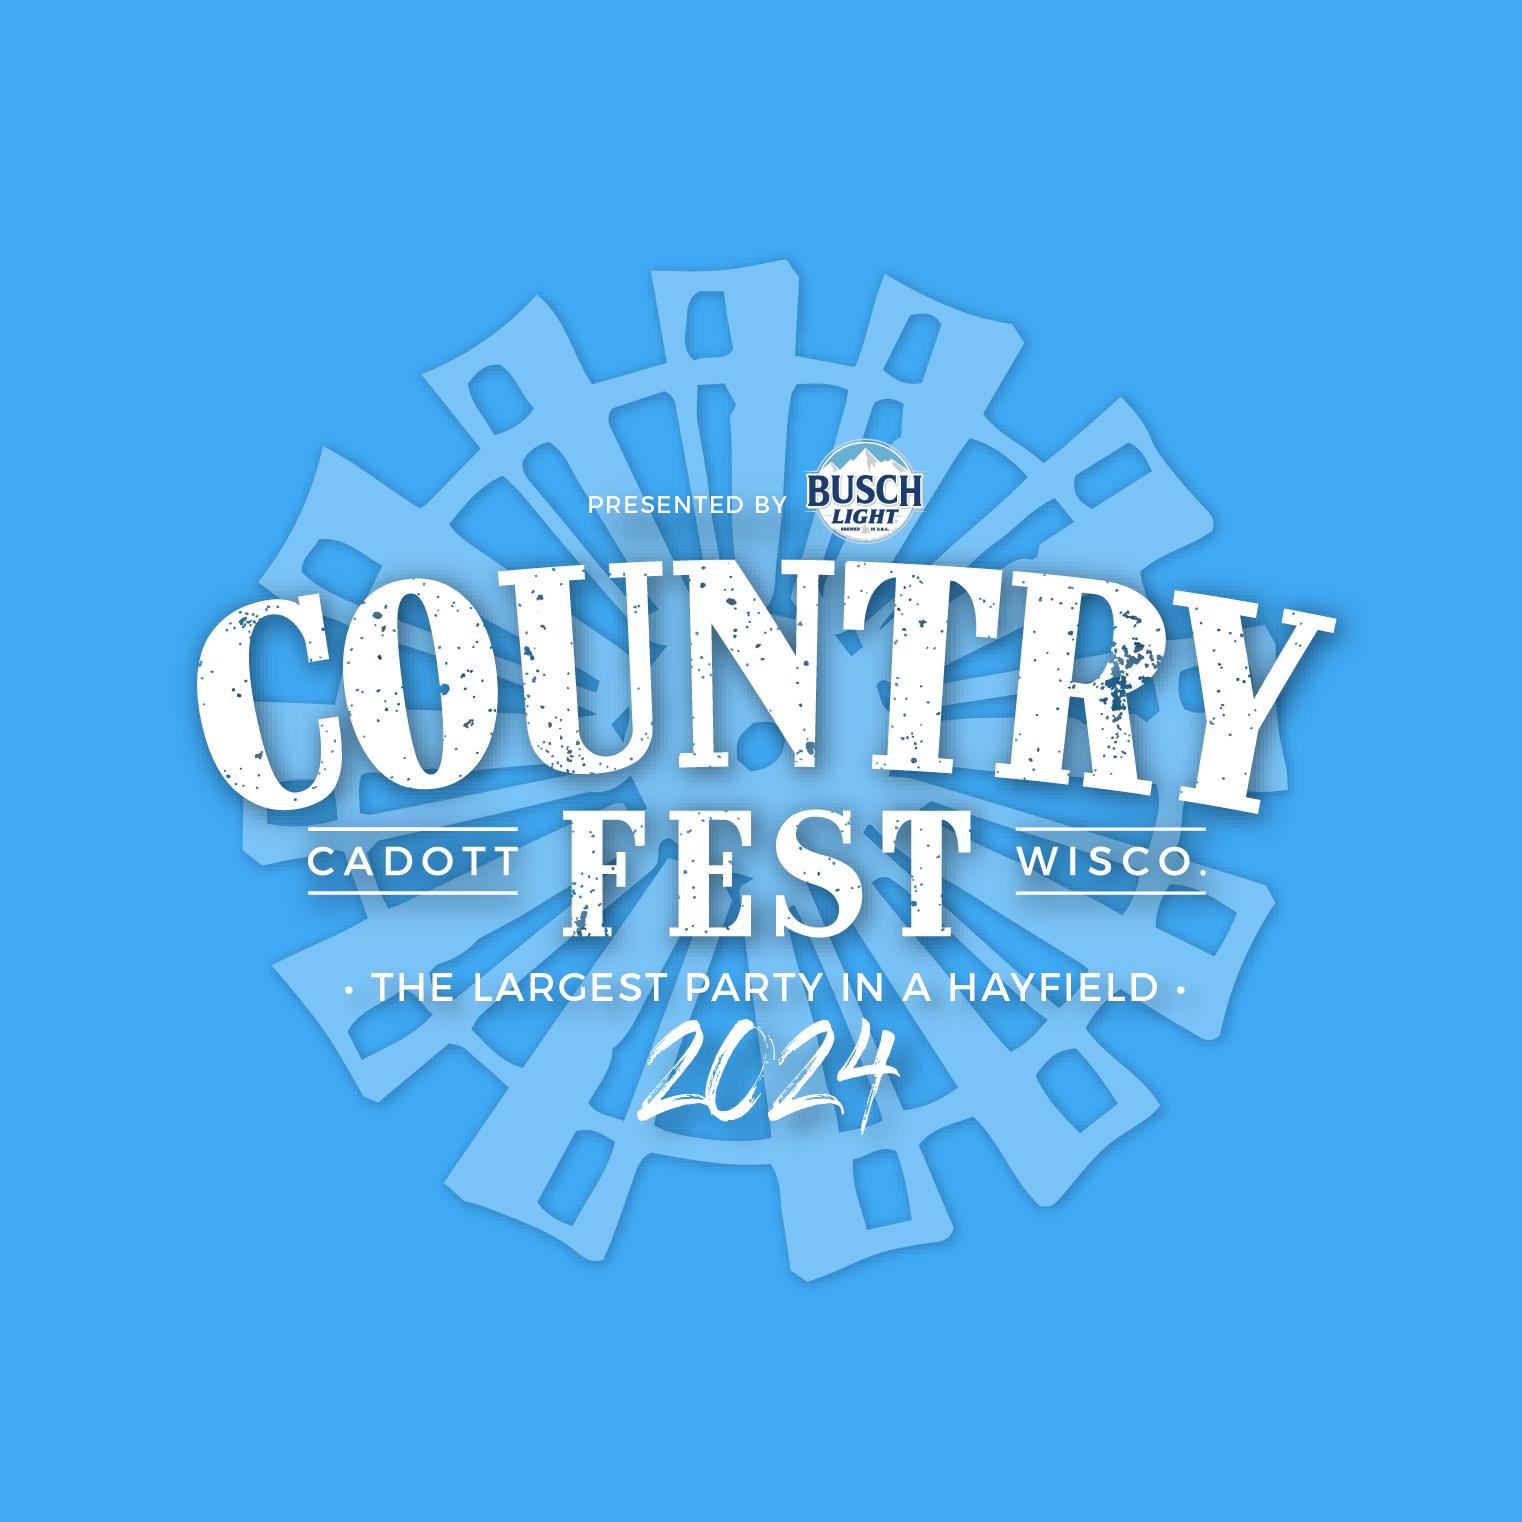 Buy Tickets to Country Fest 2024 in Cadott on Jun 27, 2024 Jun 29,2024